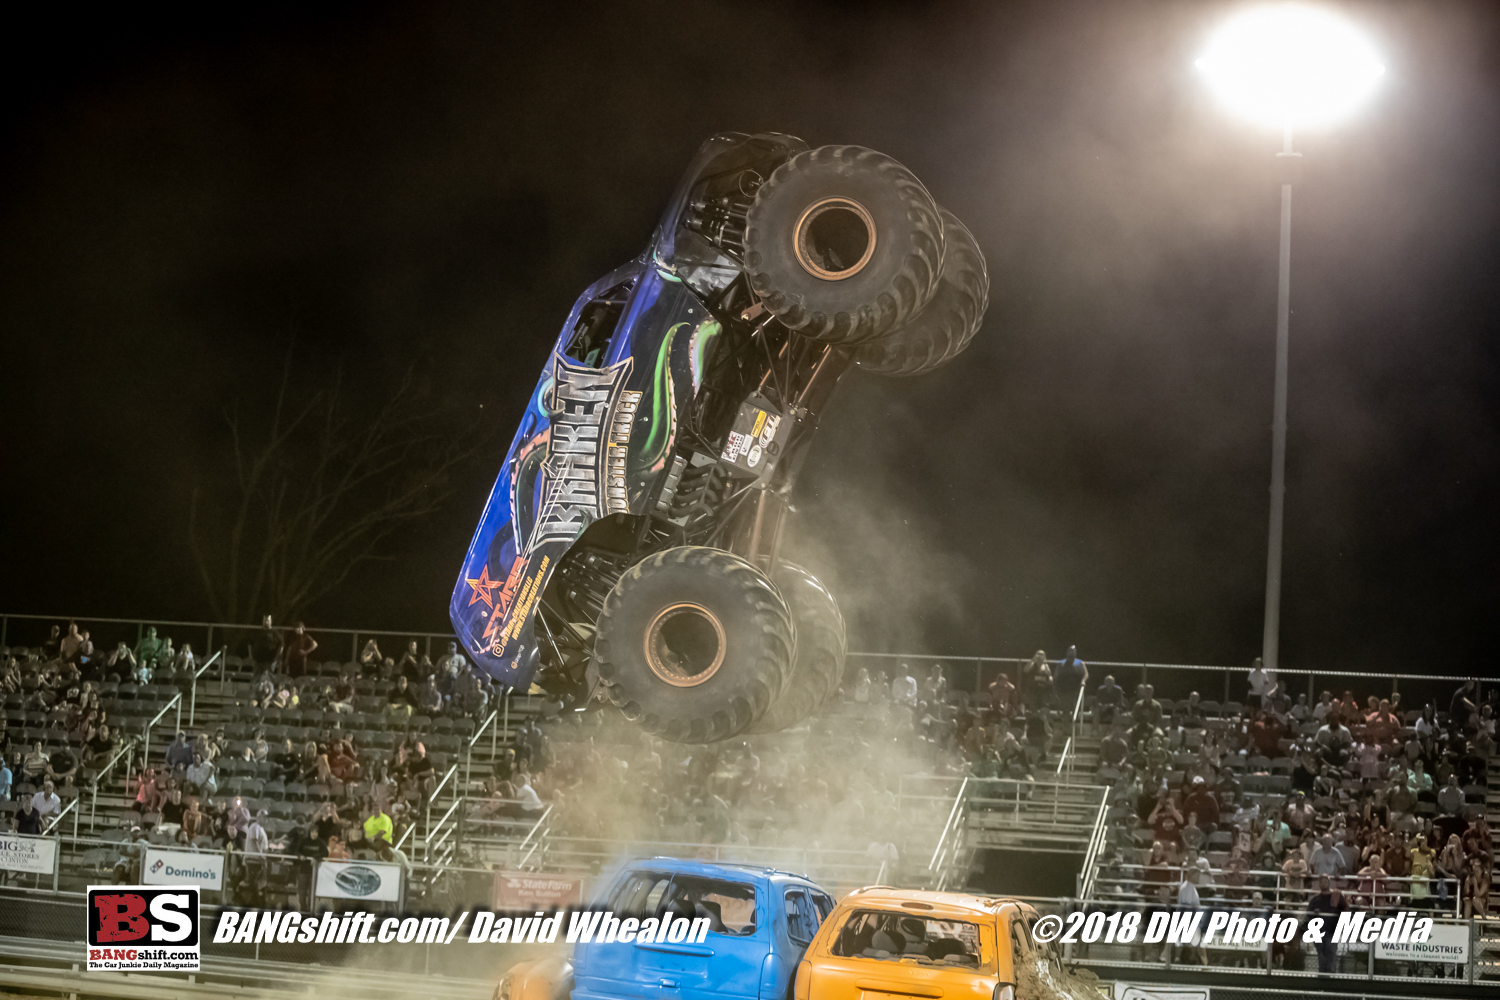 2018 GALOT Motorsports Park Monster Truck Throwdown Action Photos – High Flyin’ Fun With Awesome Trucks